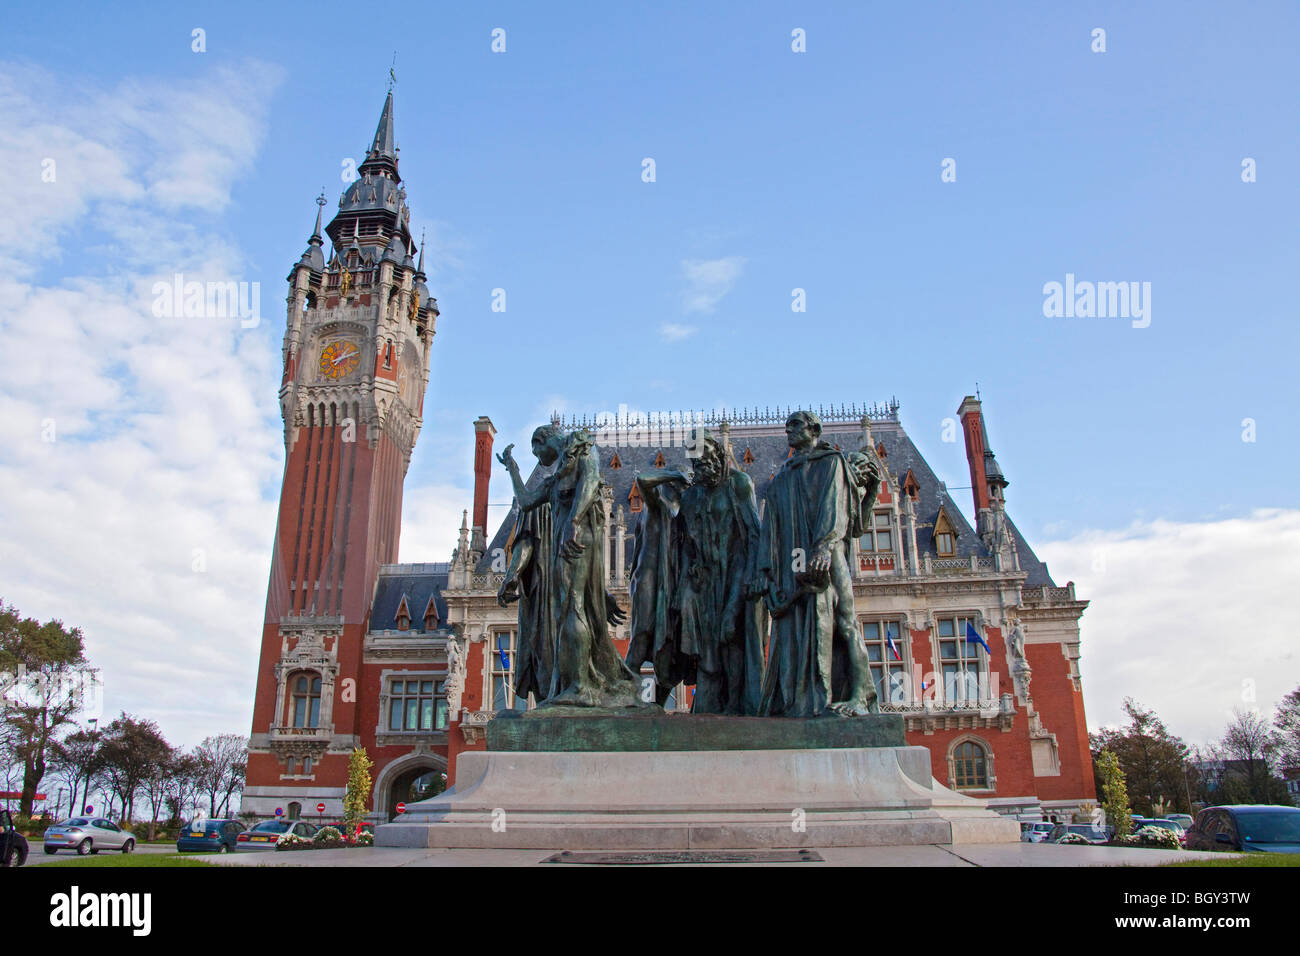 Hotel de Ville in Flemish Renaissance style, with Bourgeois (Burghers ...